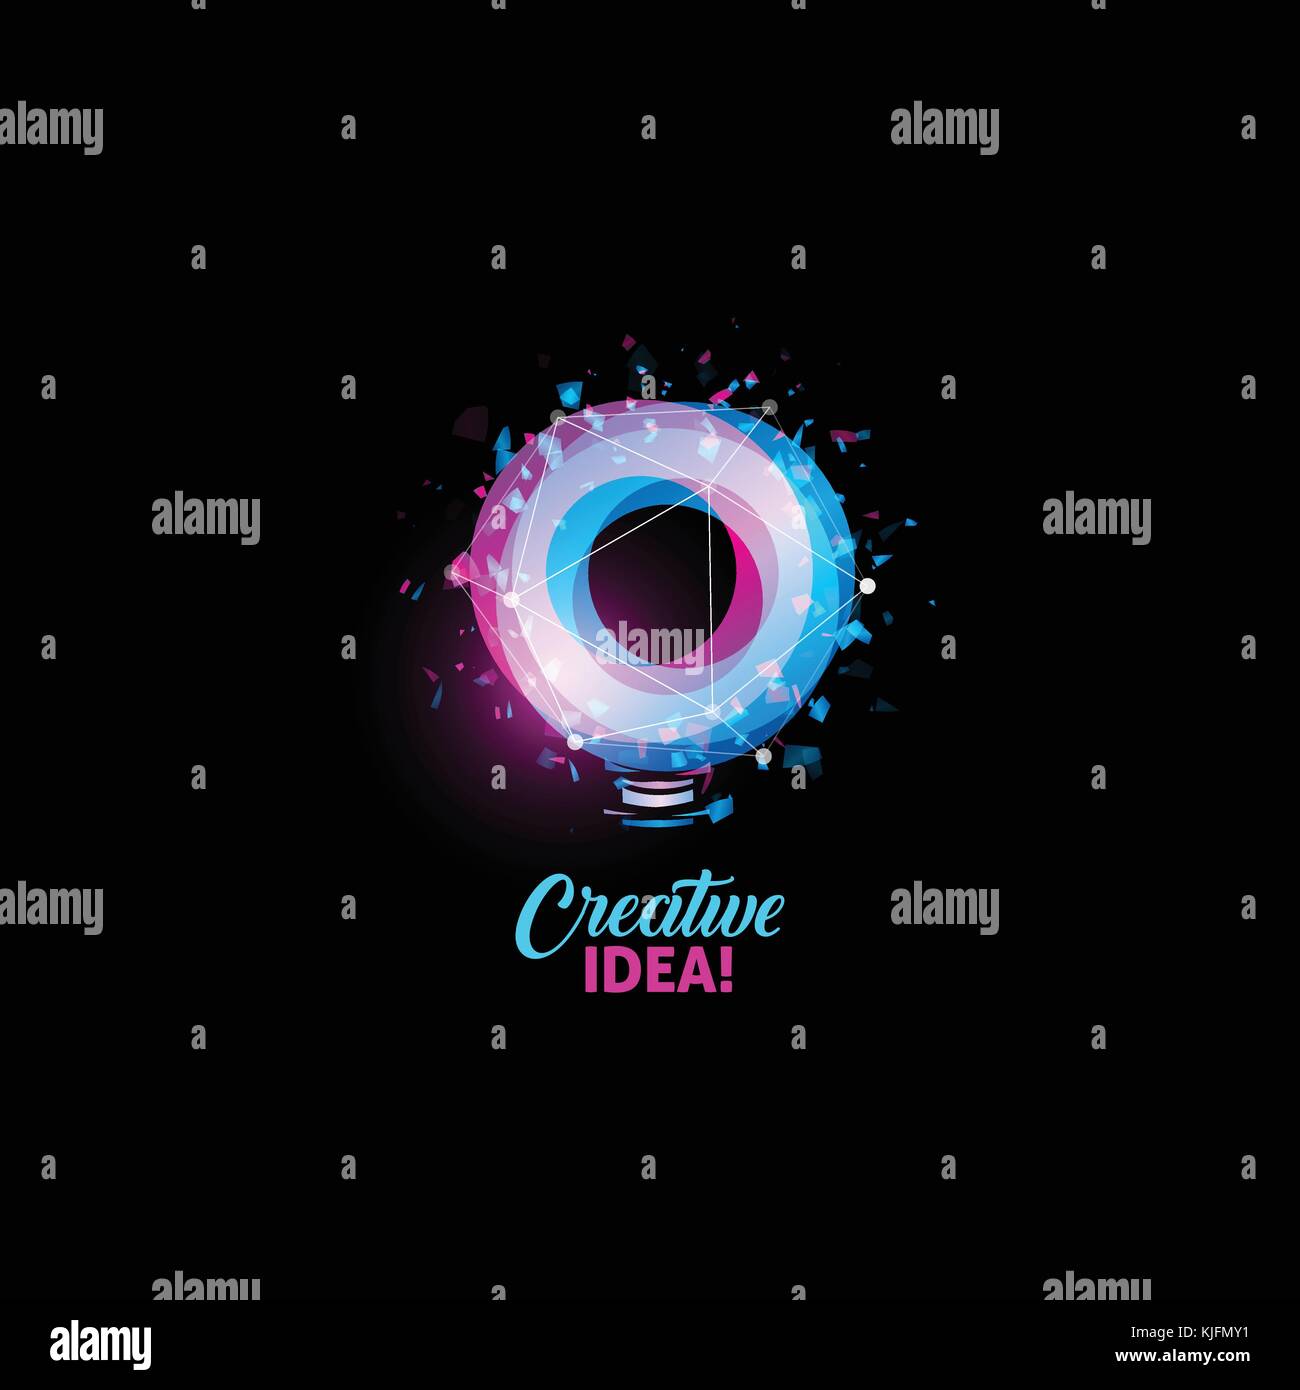 Creative idea logo, light bulb abstract vector icon. Isolated pink and blue round shape, stylized lamp with text. Digital innovation technology vector illustration. Stock Vector